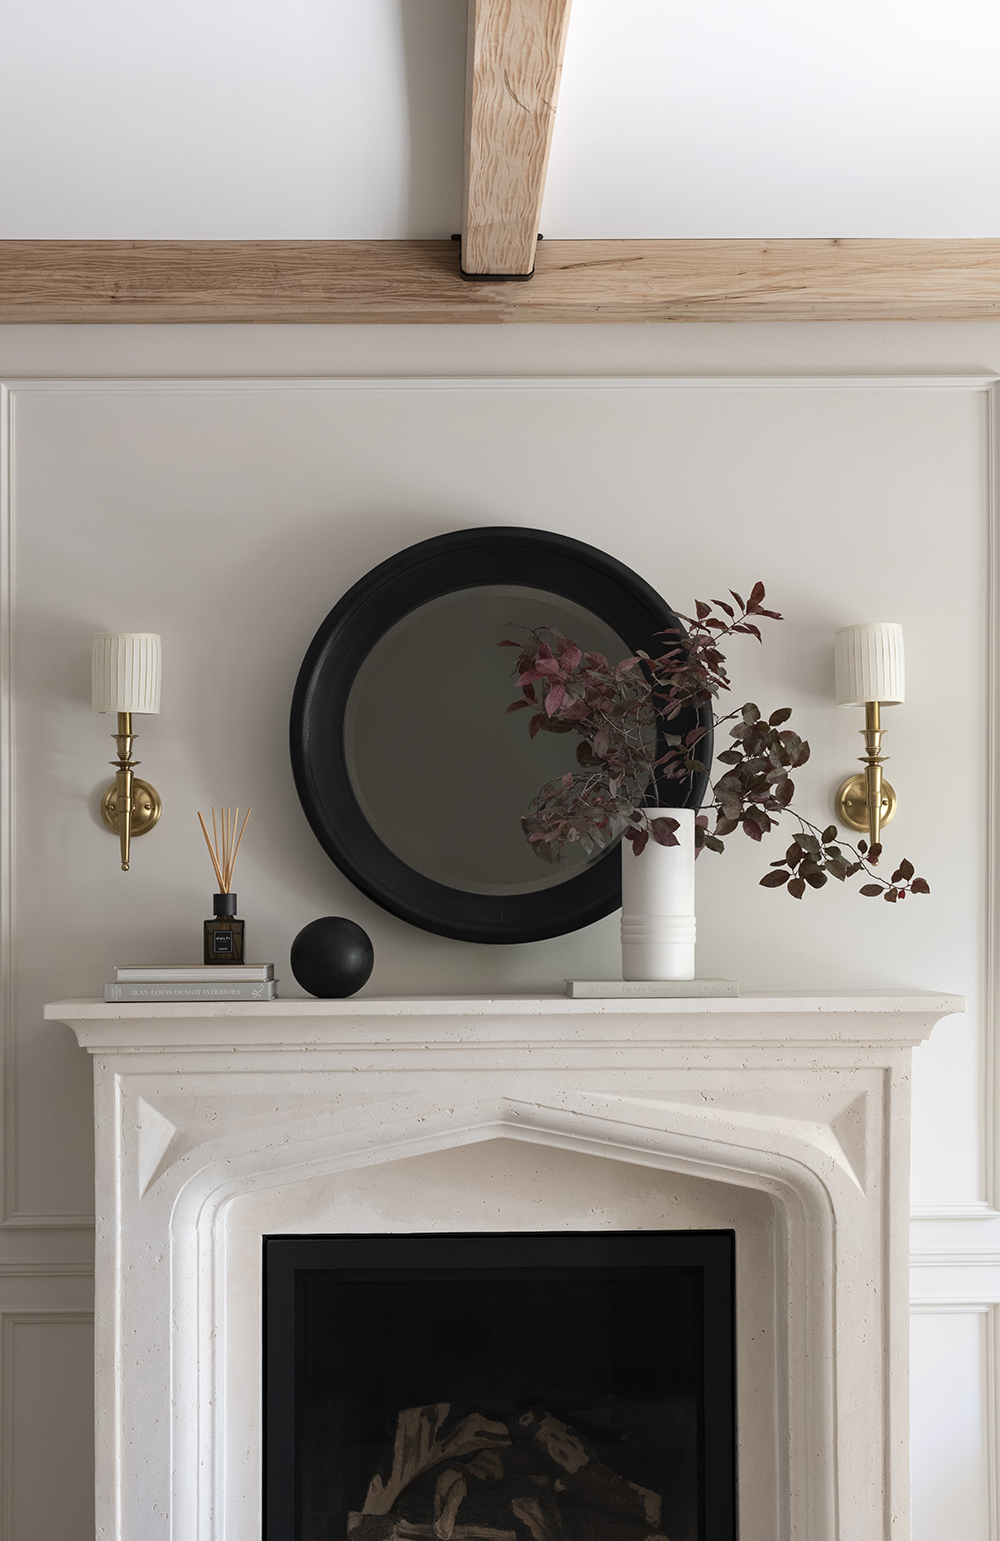 Mantel Styling Tips + 5 Looks - roomfortuesday.com